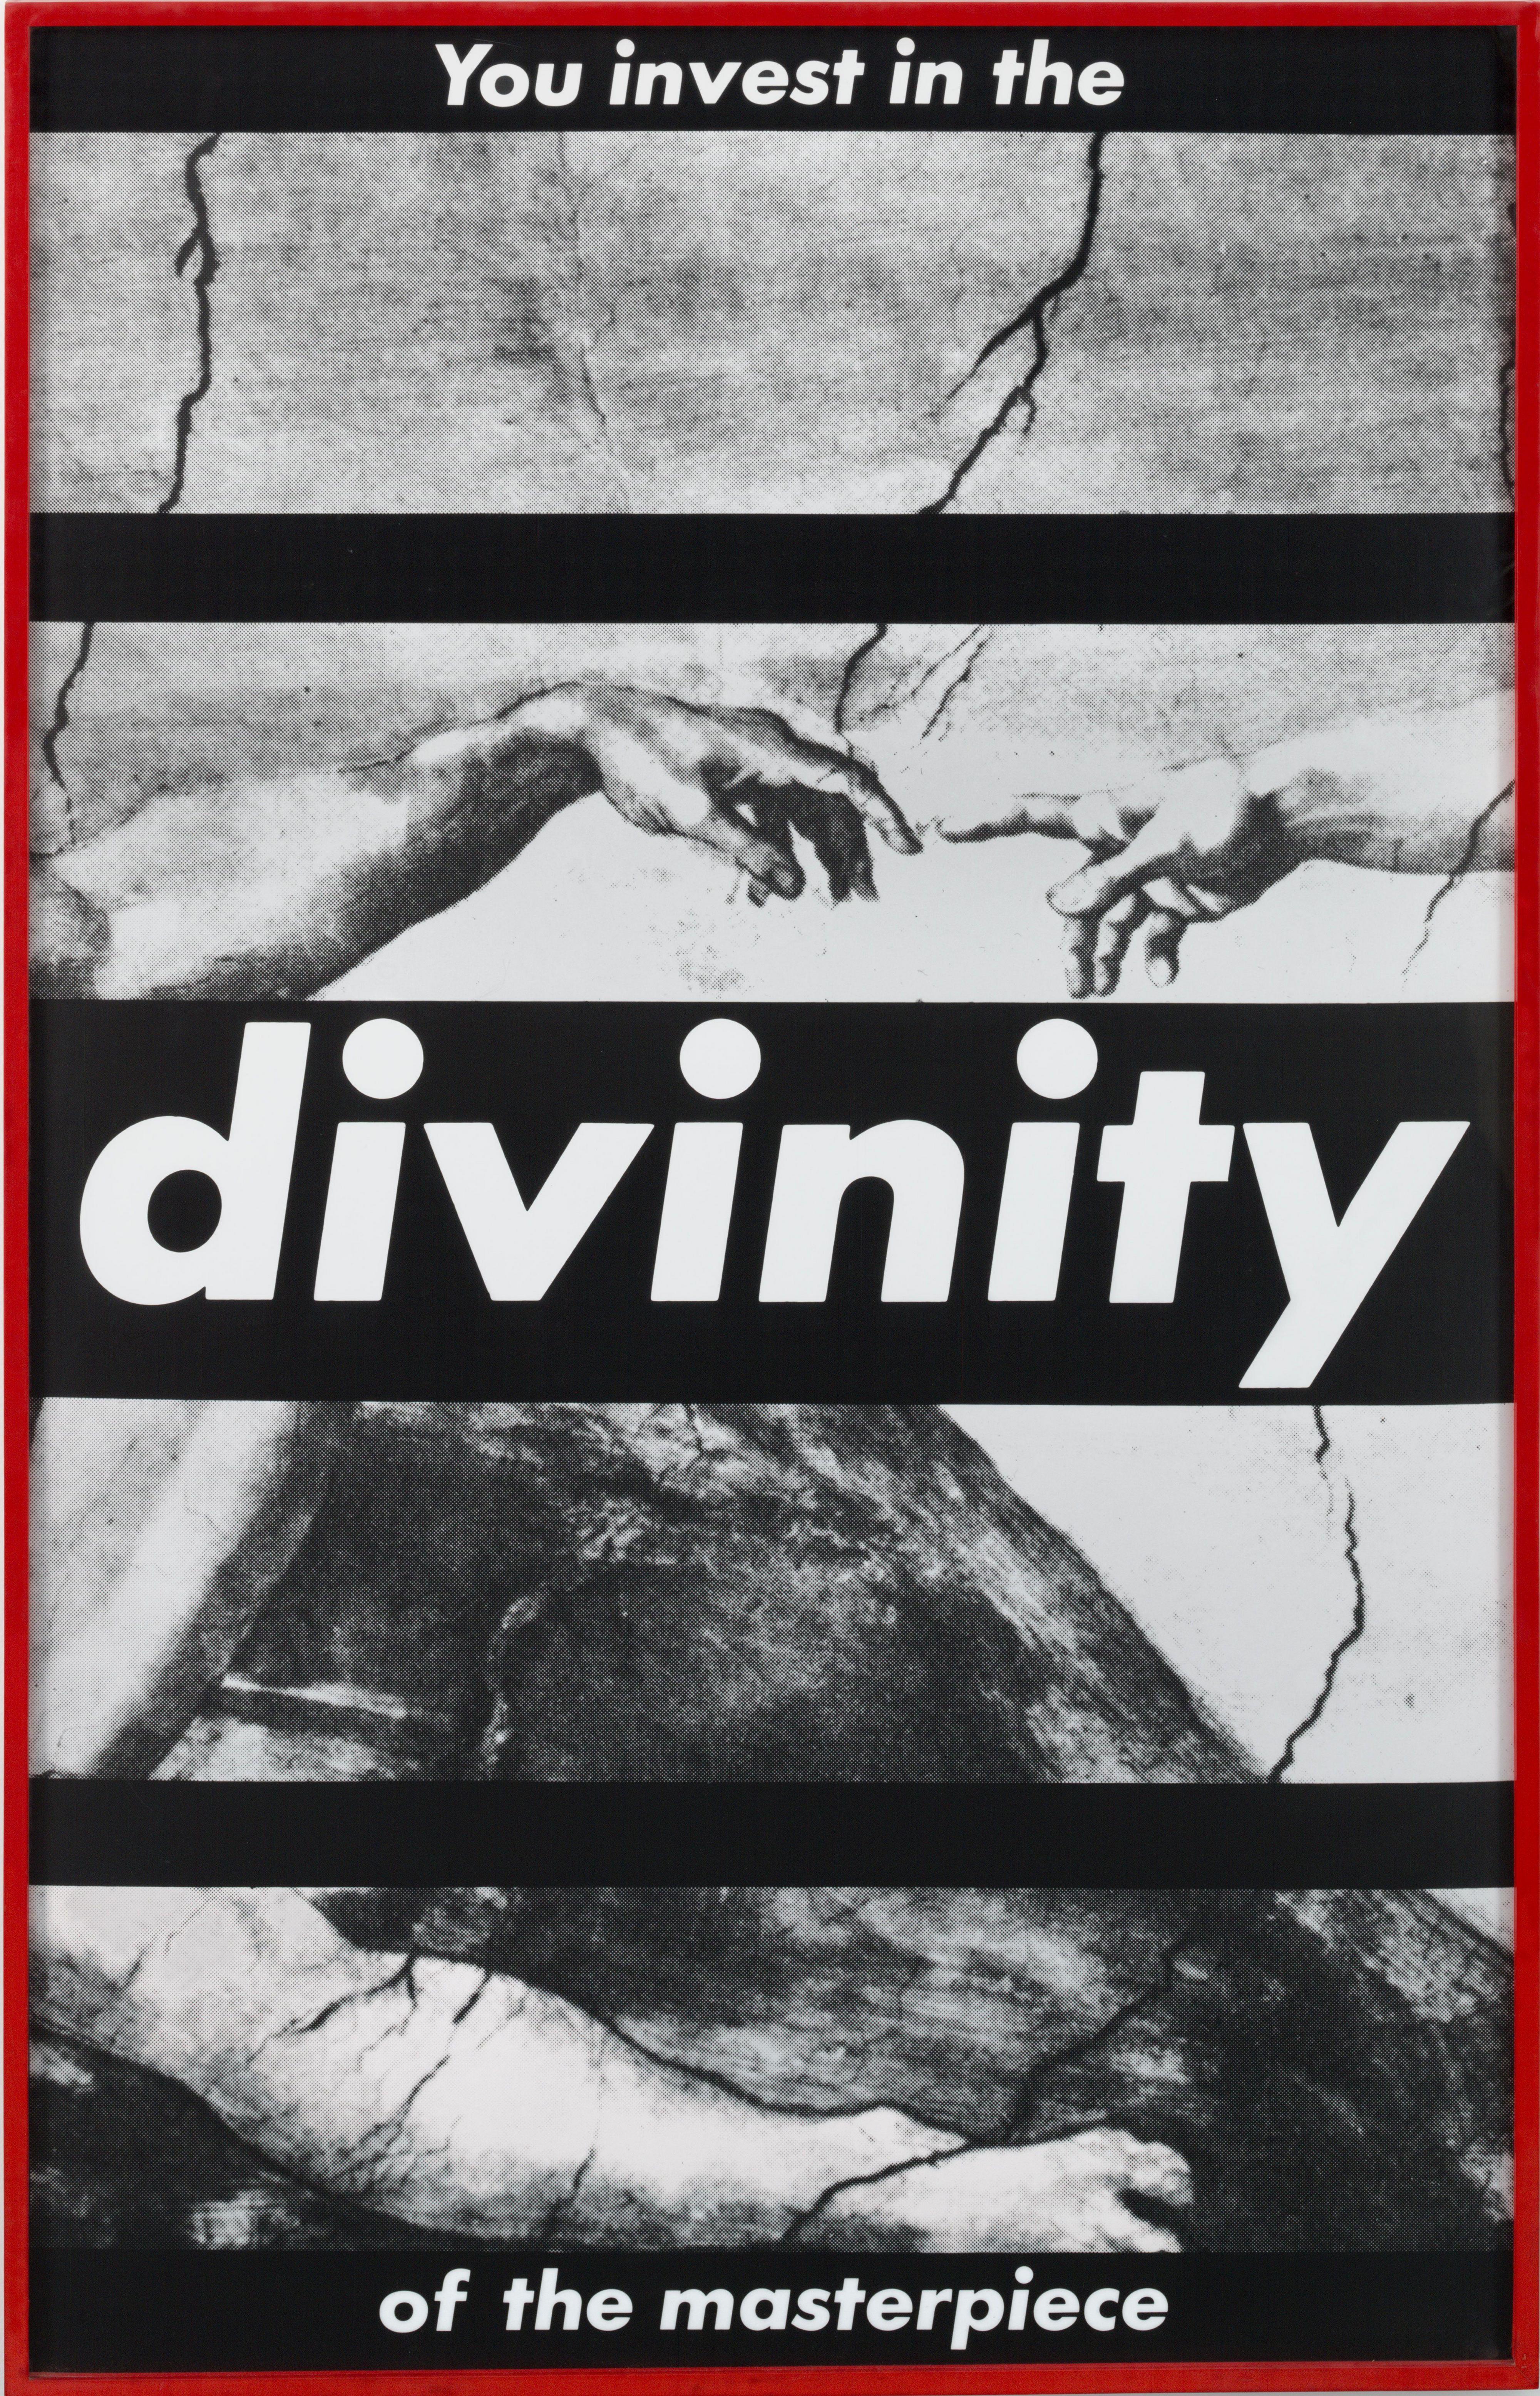 Barbara Kruger. Untitled (You Invest in the Divinity of the Masterpiece). 1982. Source: MoMA